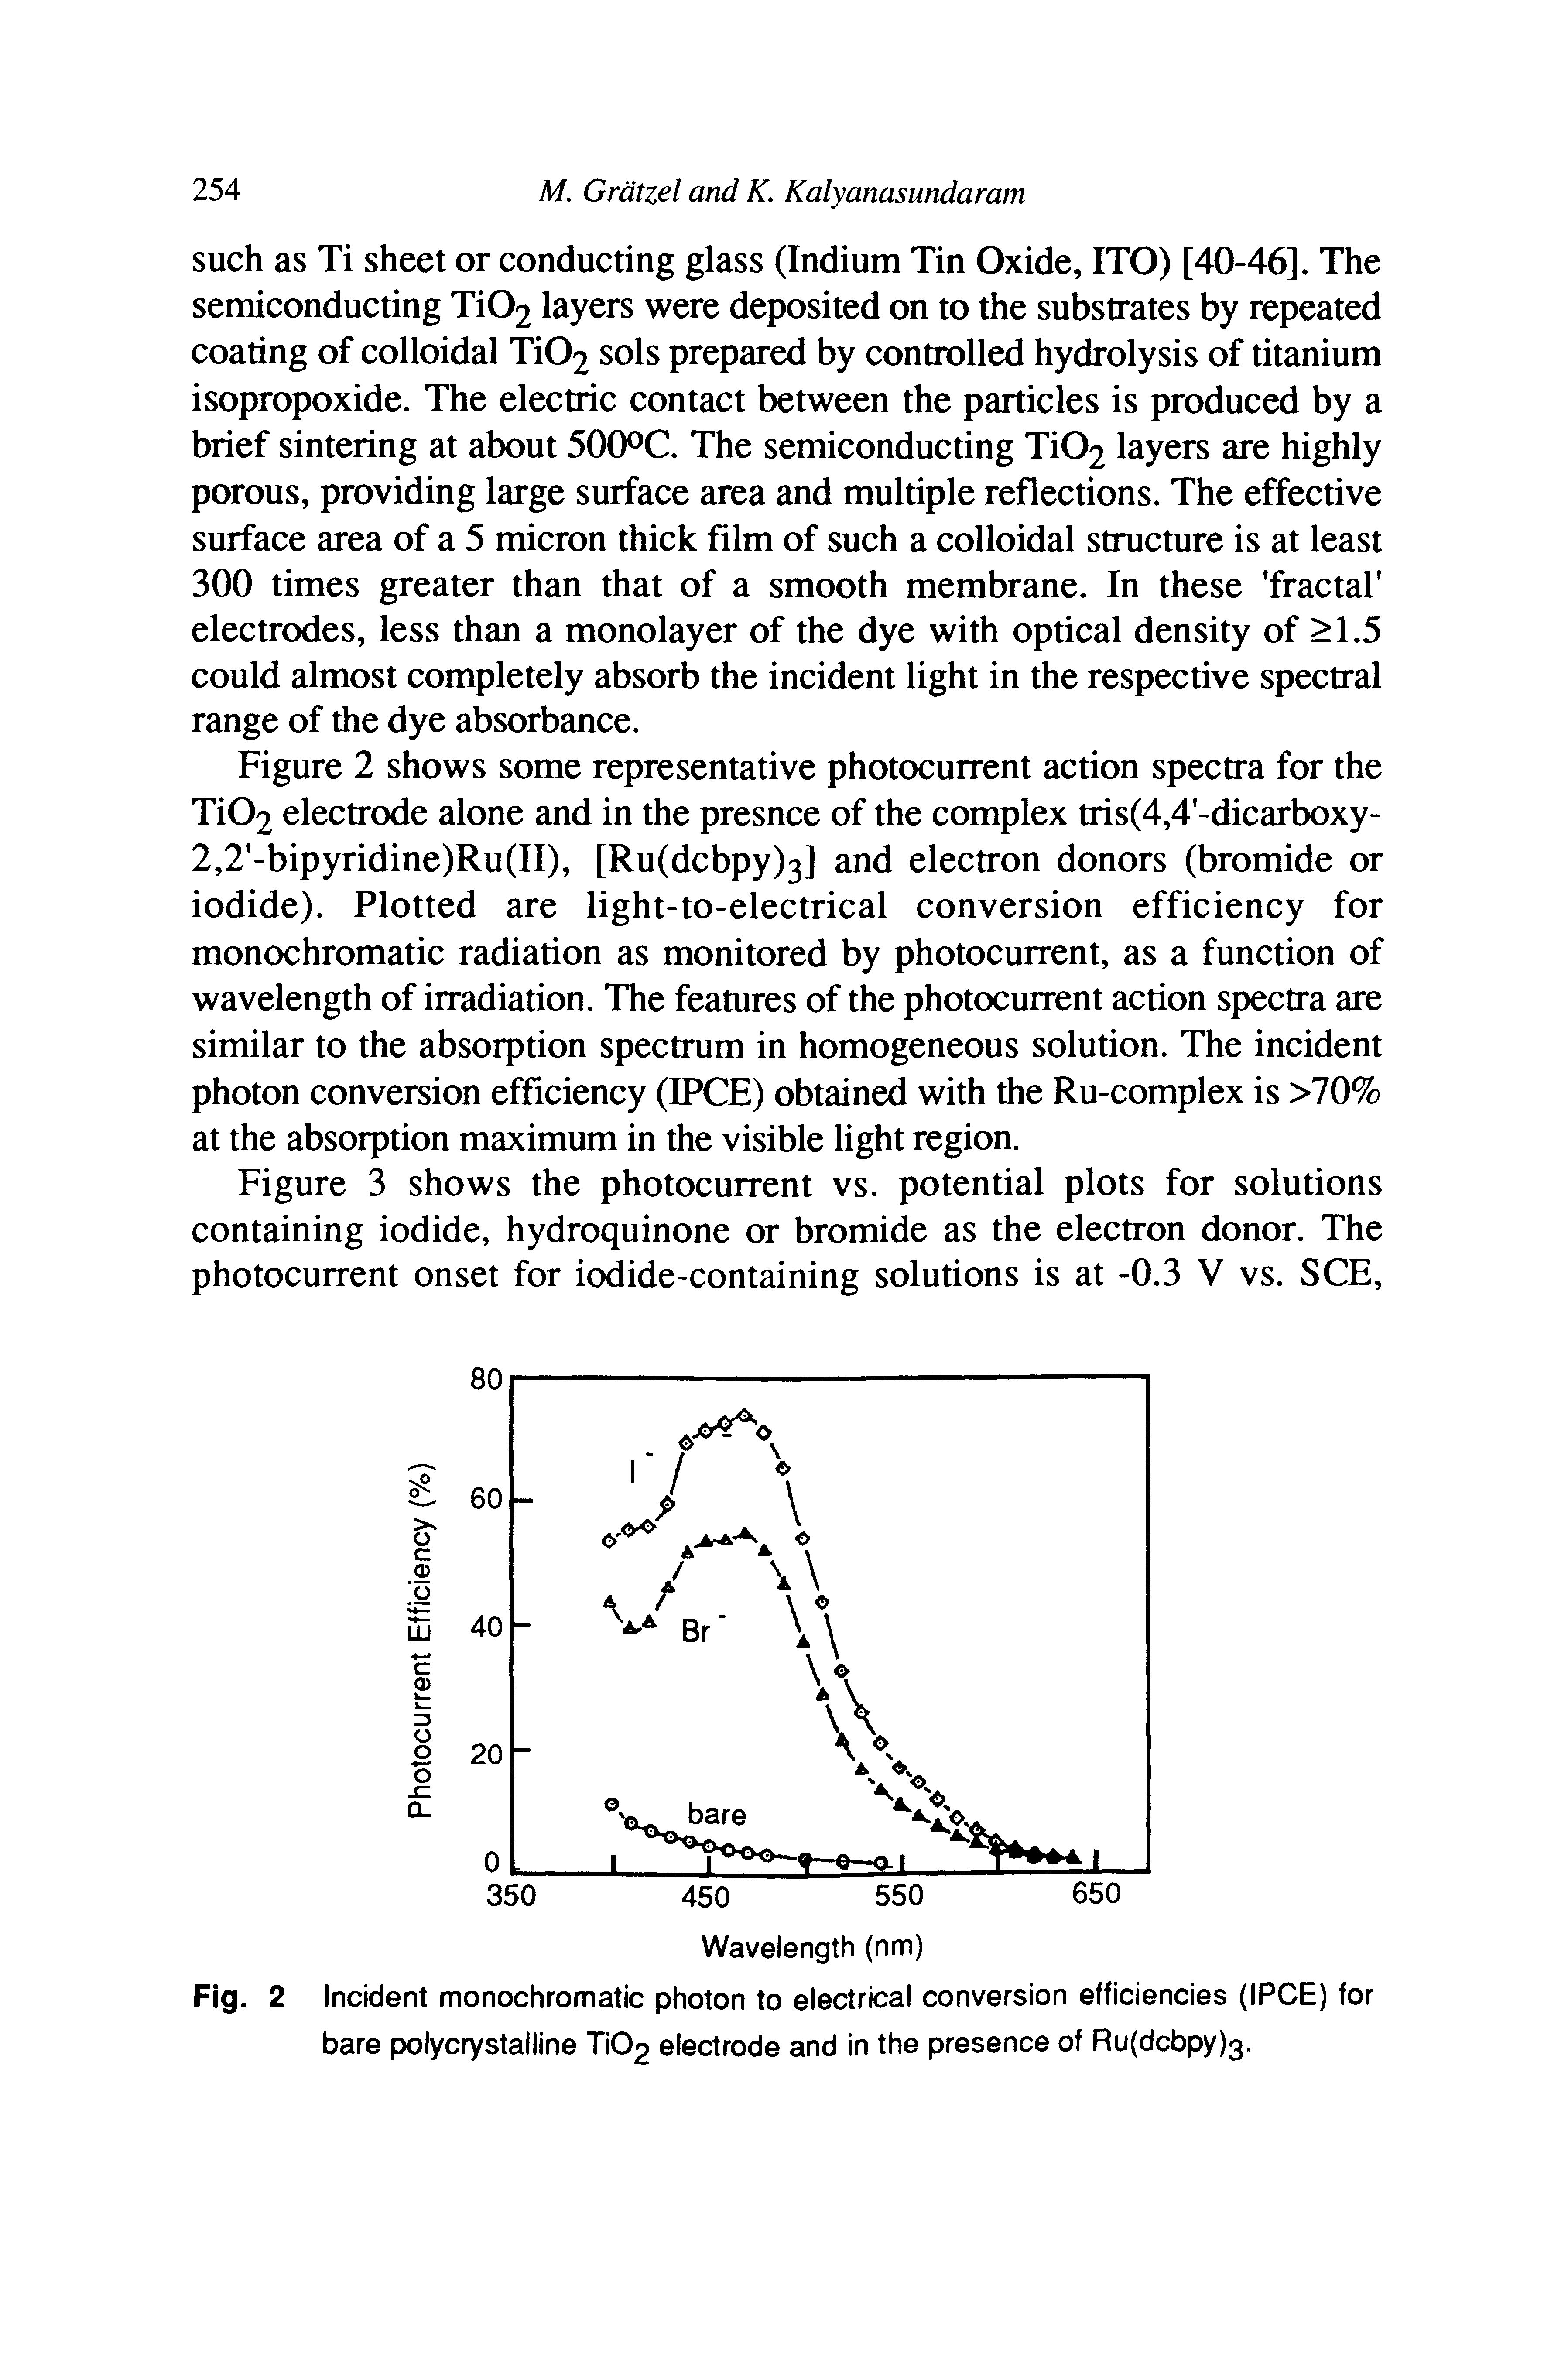 Fig. 2 Incident monochromatic photon to electrical conversion efficiencies (IPCE) for bare polycrystalline Ti02 electrode and in the presence of Ru(dcbpy)3.